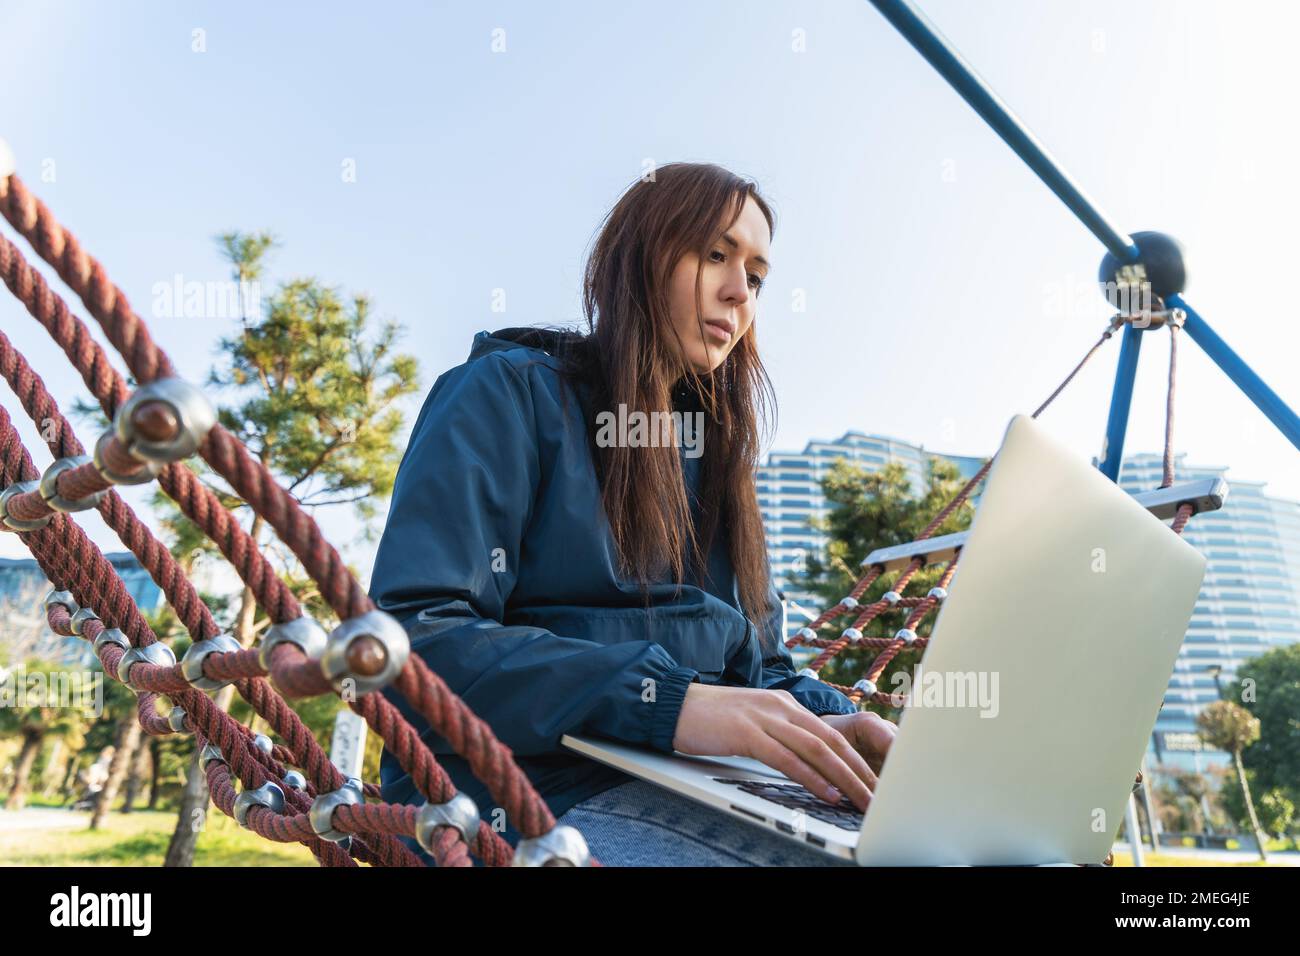 Portrait of young beautiful freelancer woman sitting in hammock in park and working at laptop. Stock Photo